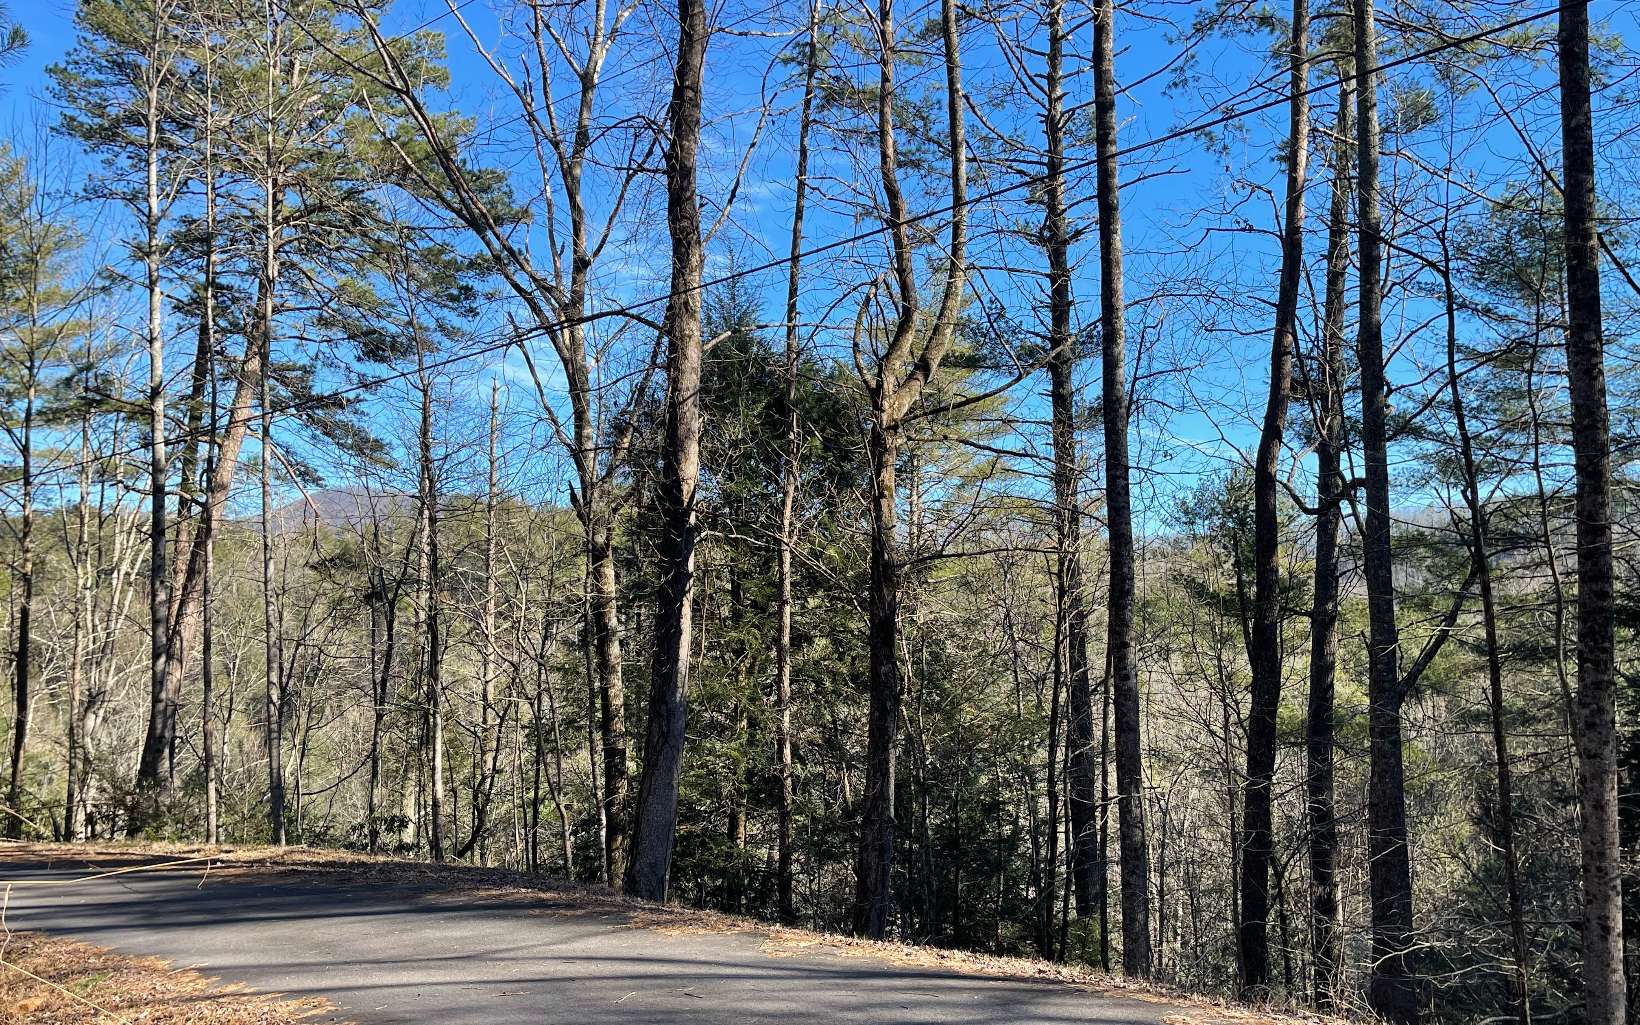 Mountain view! Three lots totaling 3.88 acres in North Georgia’s Whitepath golf course located 5 miles north of Ellijay, Georgia; just 1 1/2 hours north of Atlanta. The golf course itself is a reflection of the mountains which surround it. The 8 acre Whitepath Lake and the Ellijay River highlight several other creeks and ponds spread out along the course. Designed by Rocky Roquemore and Joe Lee, the course is challenging to the low handicap golfer, yet friendly to those with higher handicaps. Whitepath Golf Club is truly a golf enthusiast's dream. Beautiful rolling terrain and long range views of the surrounding Blue Ridge Mountains and the Cohutta Wilderness make this course one of the most enjoyable and picturesque golf courses in North Georgia. The course offers small, fast bent grass greens that are meticulously maintained for your golfing pleasure.